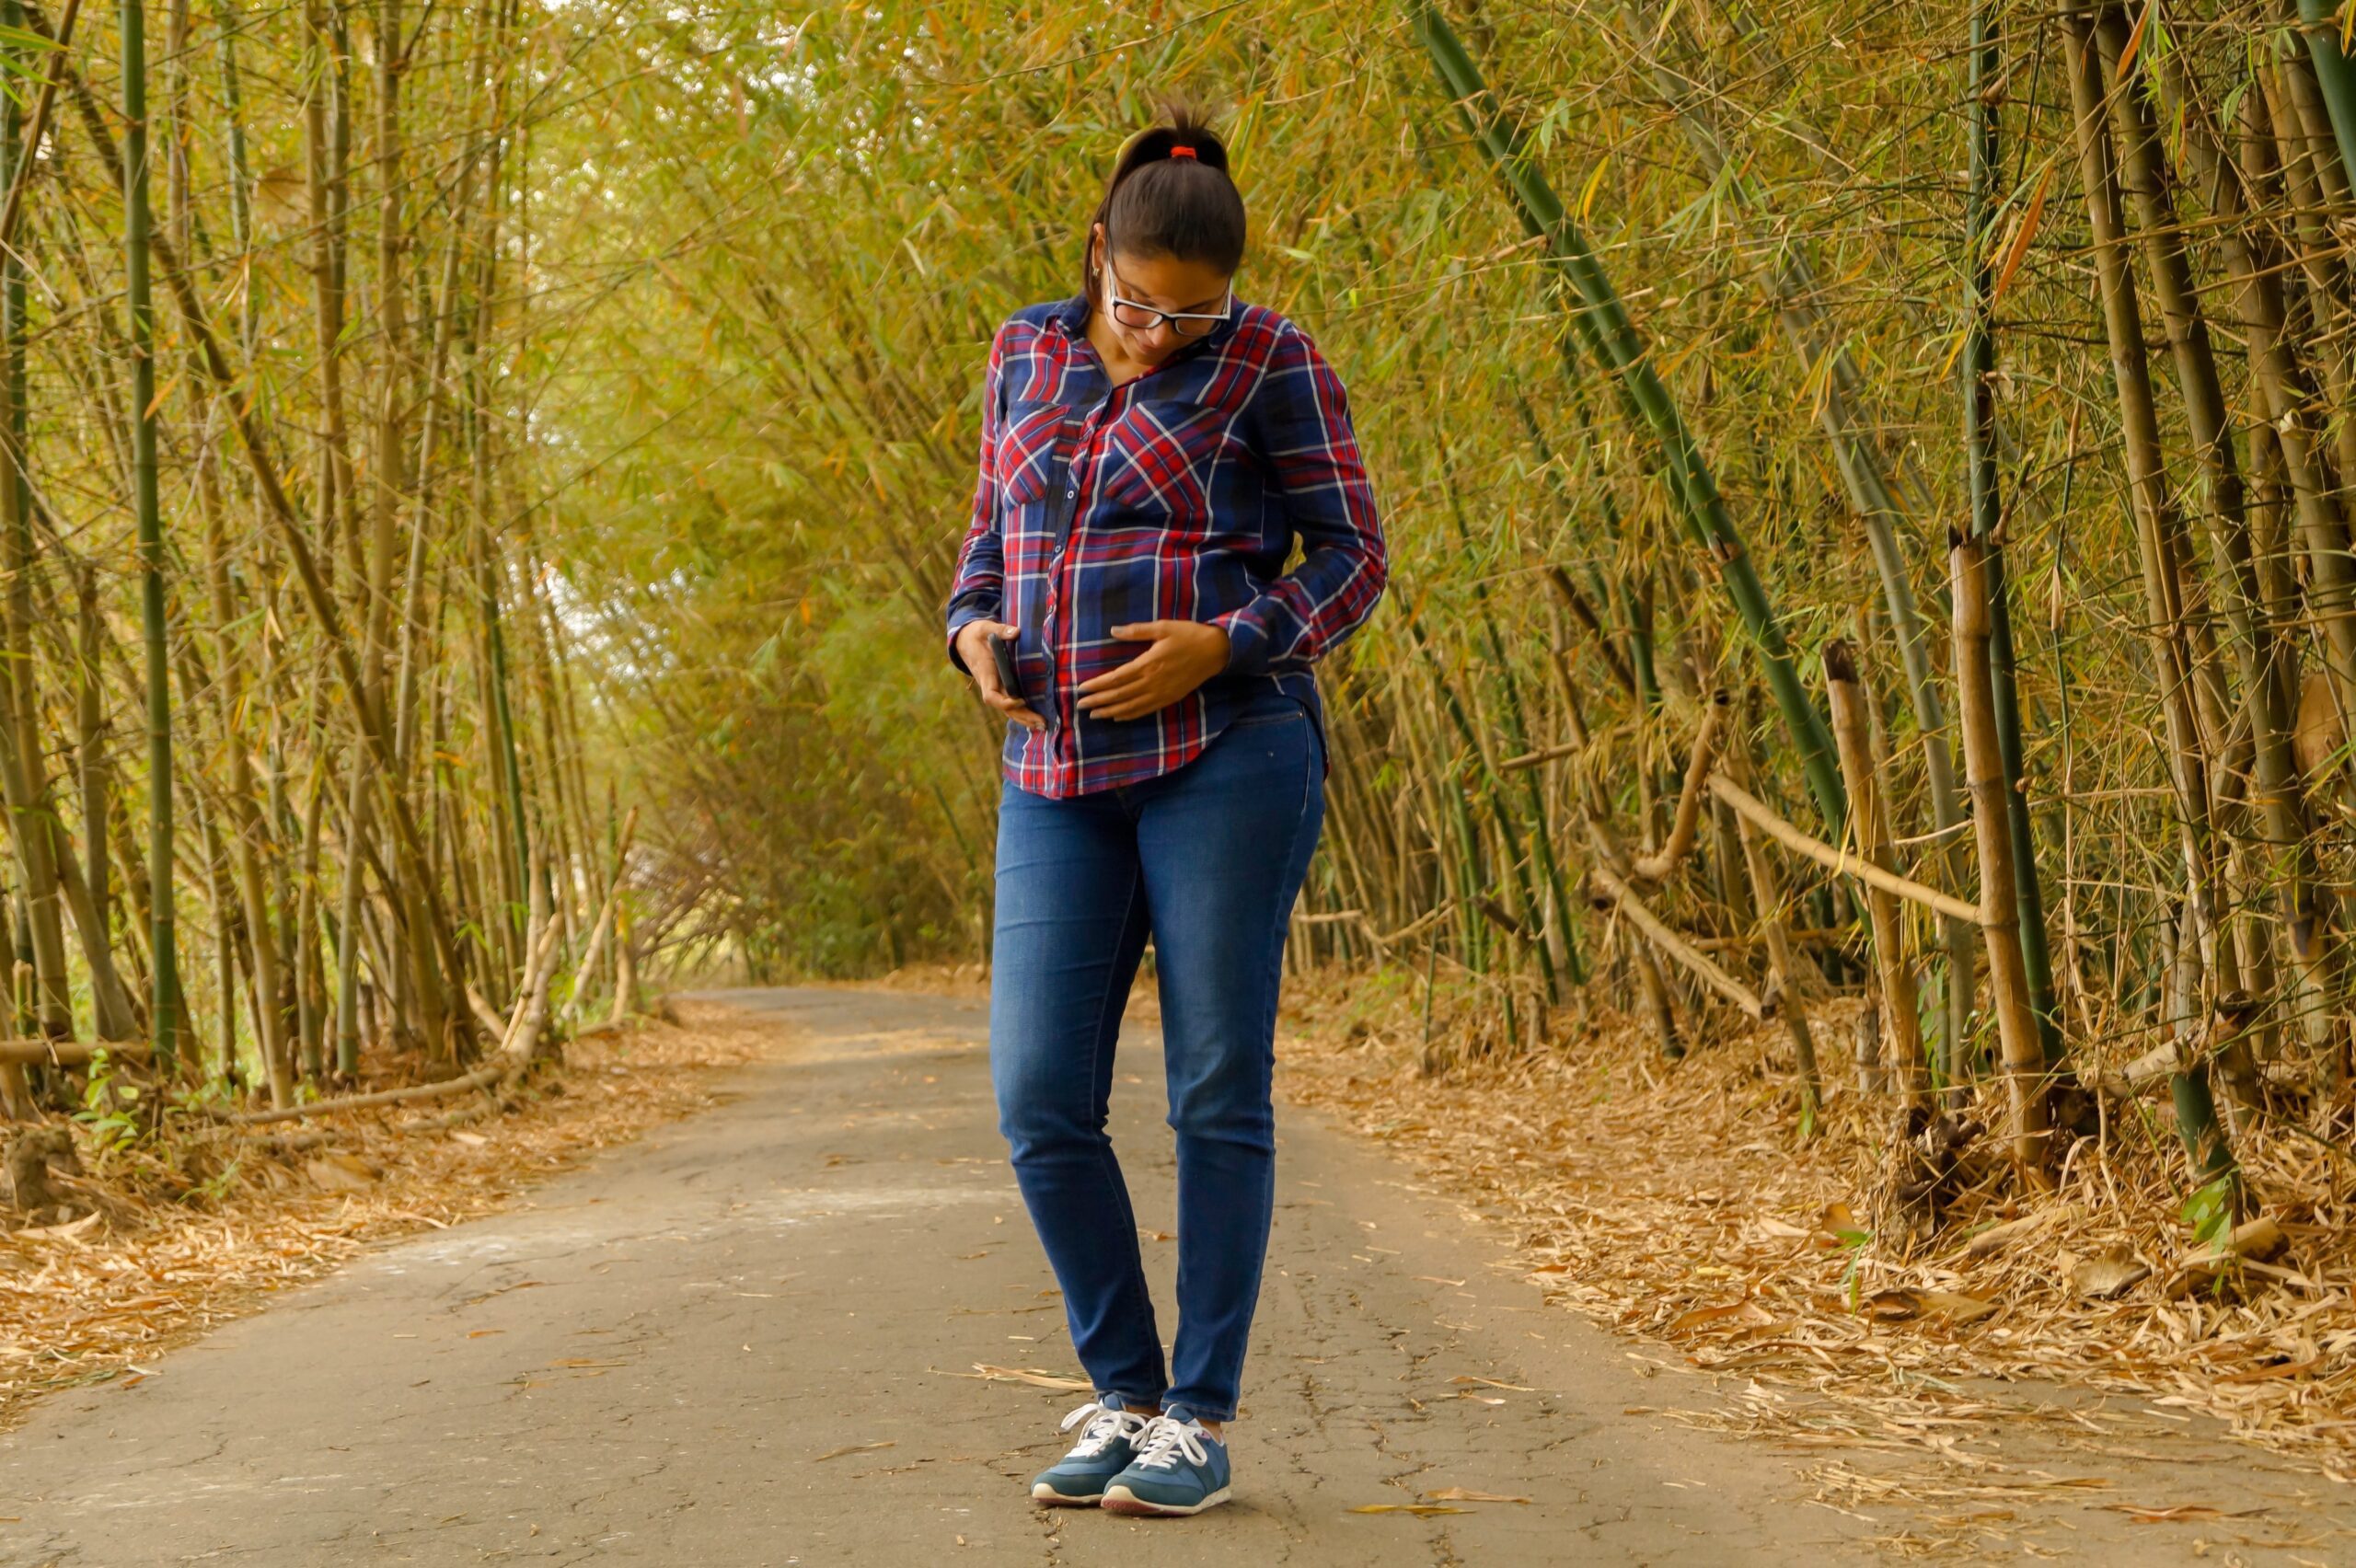 exercise in labor: person standing on dirt road through a bamboo forest while pregnant